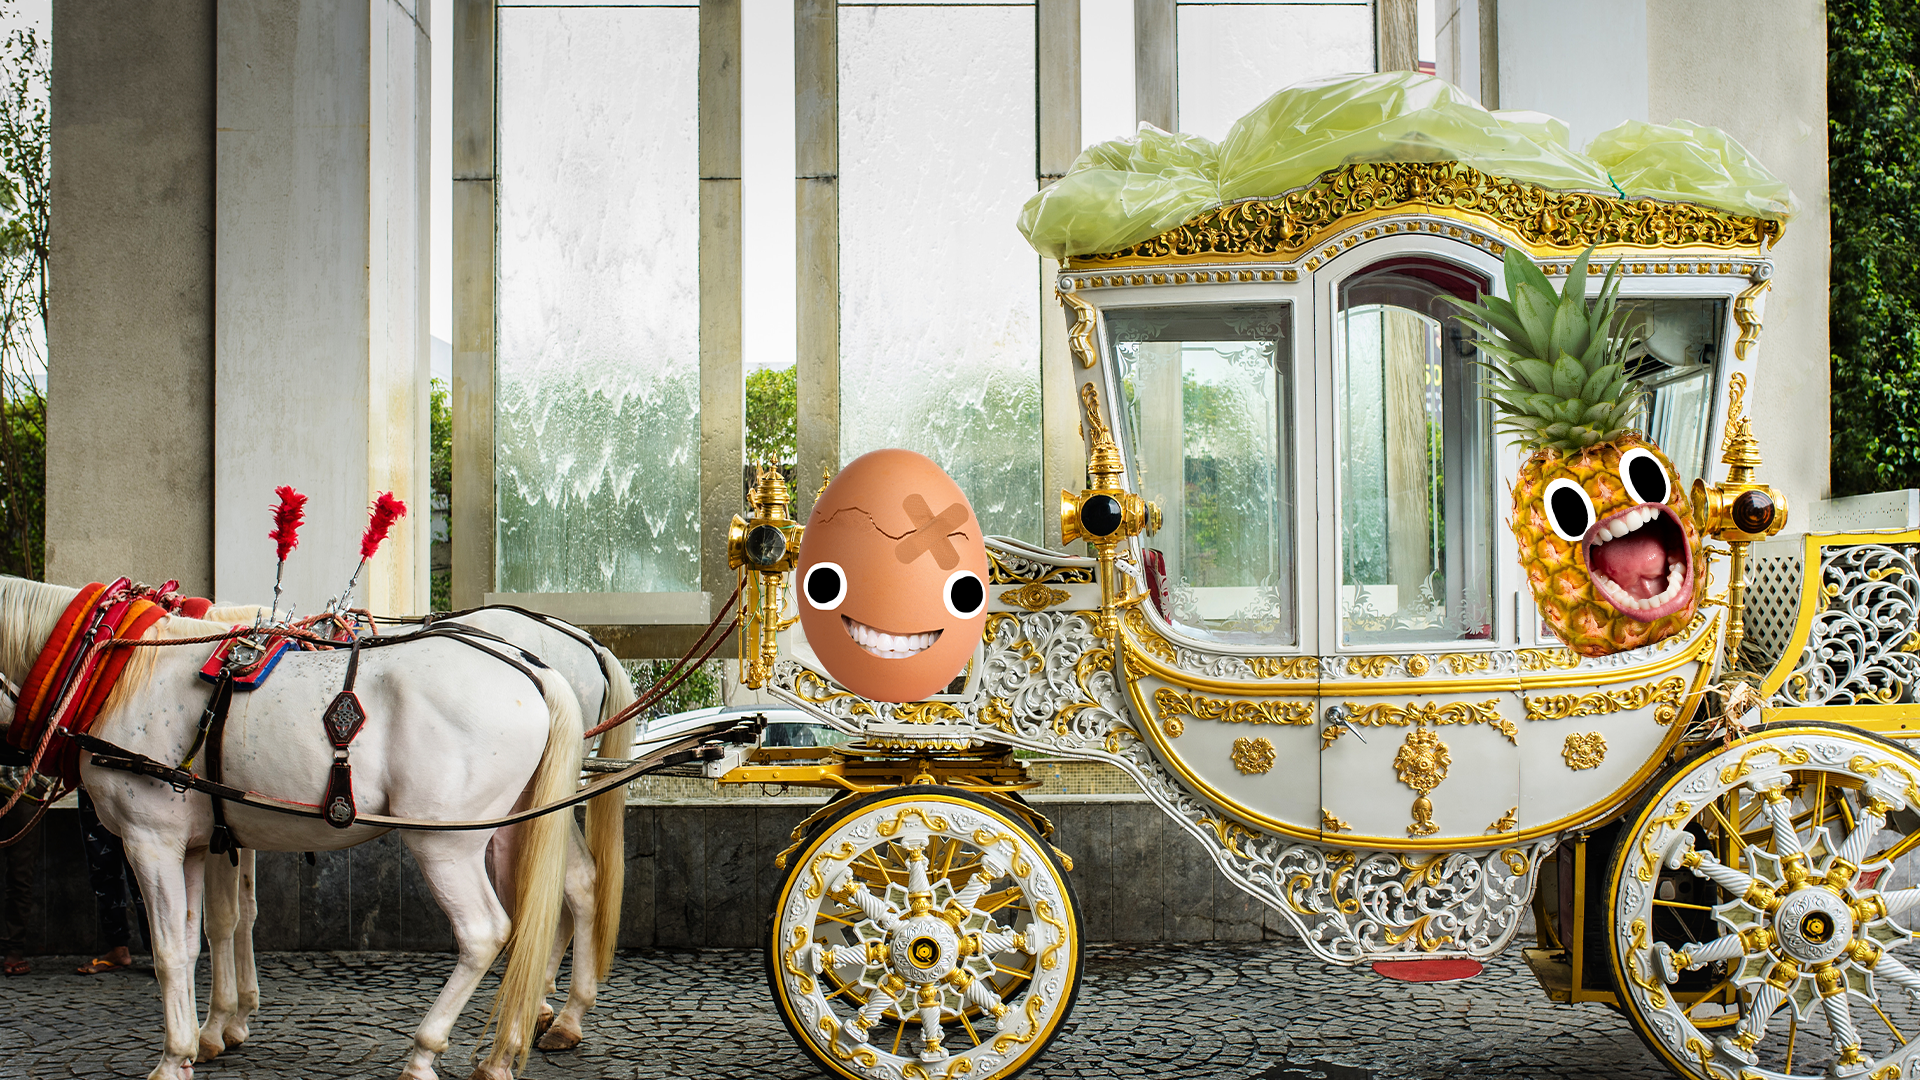 Royal carriage with Beano egg and pineapple